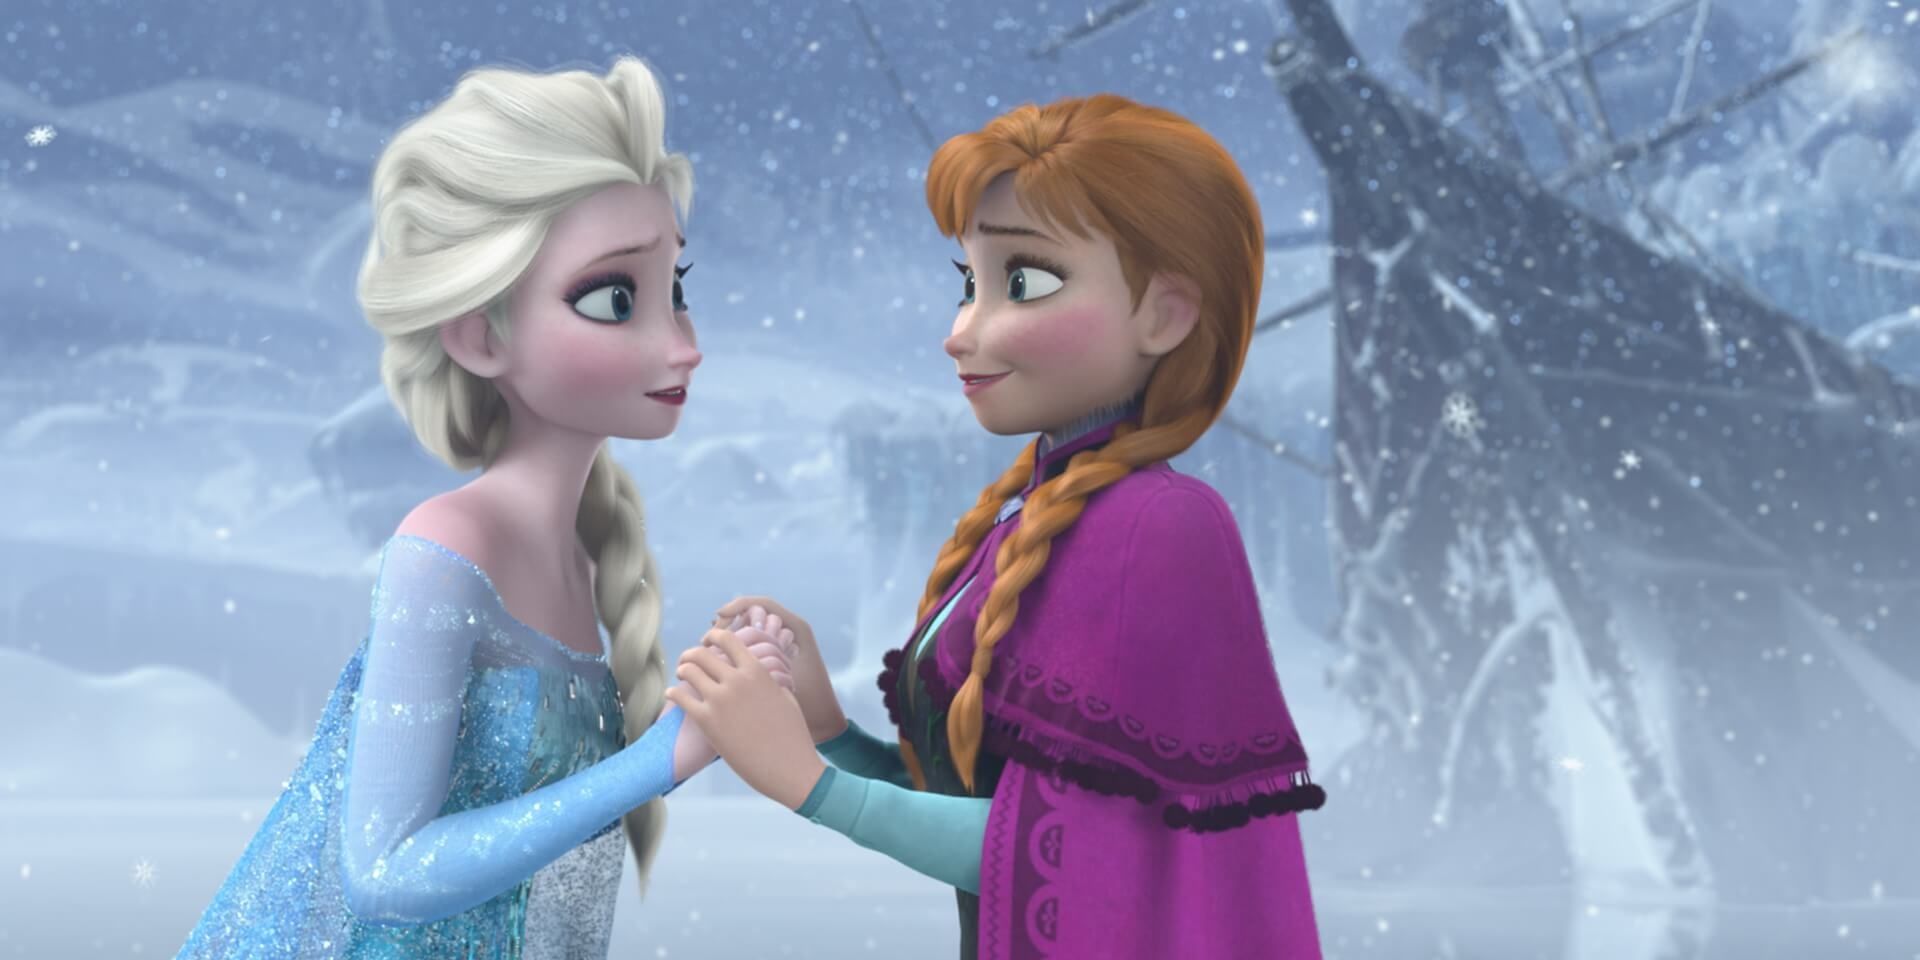 Anna and Elsa holding hands in Frozen.